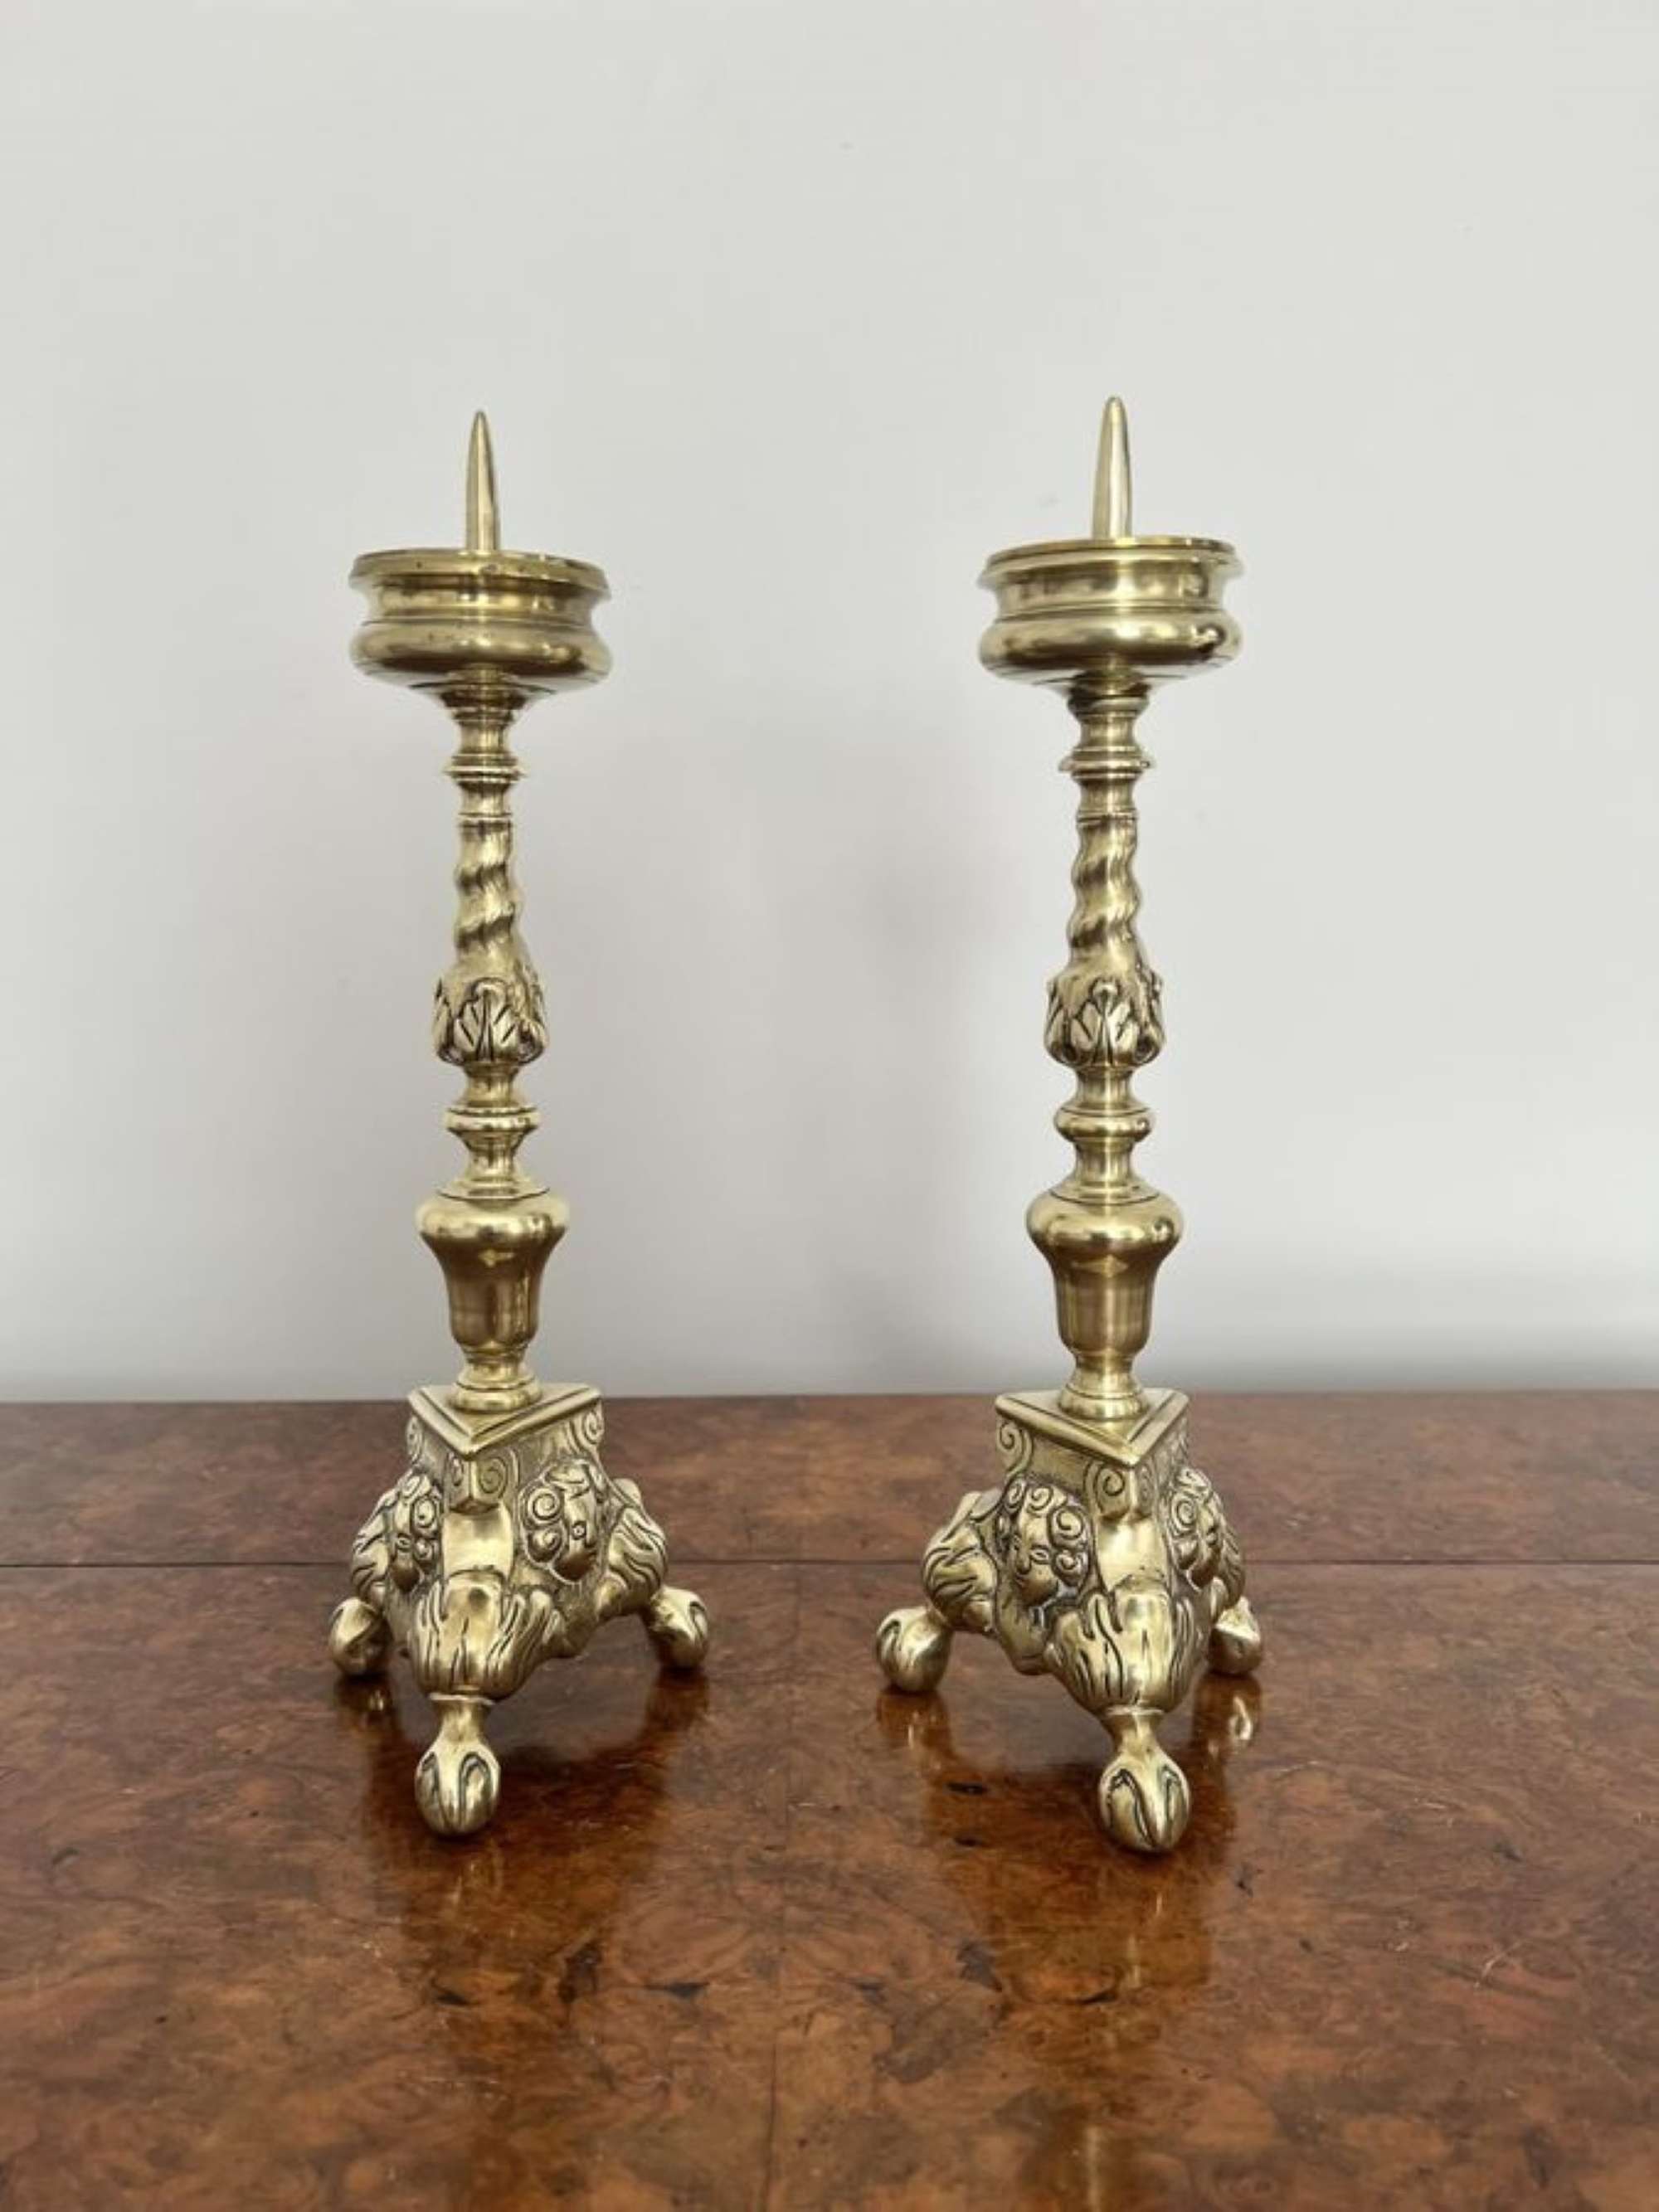 Quality Pair Of Unusual Antique Victorian Ornate Brass Pricket Candlestick